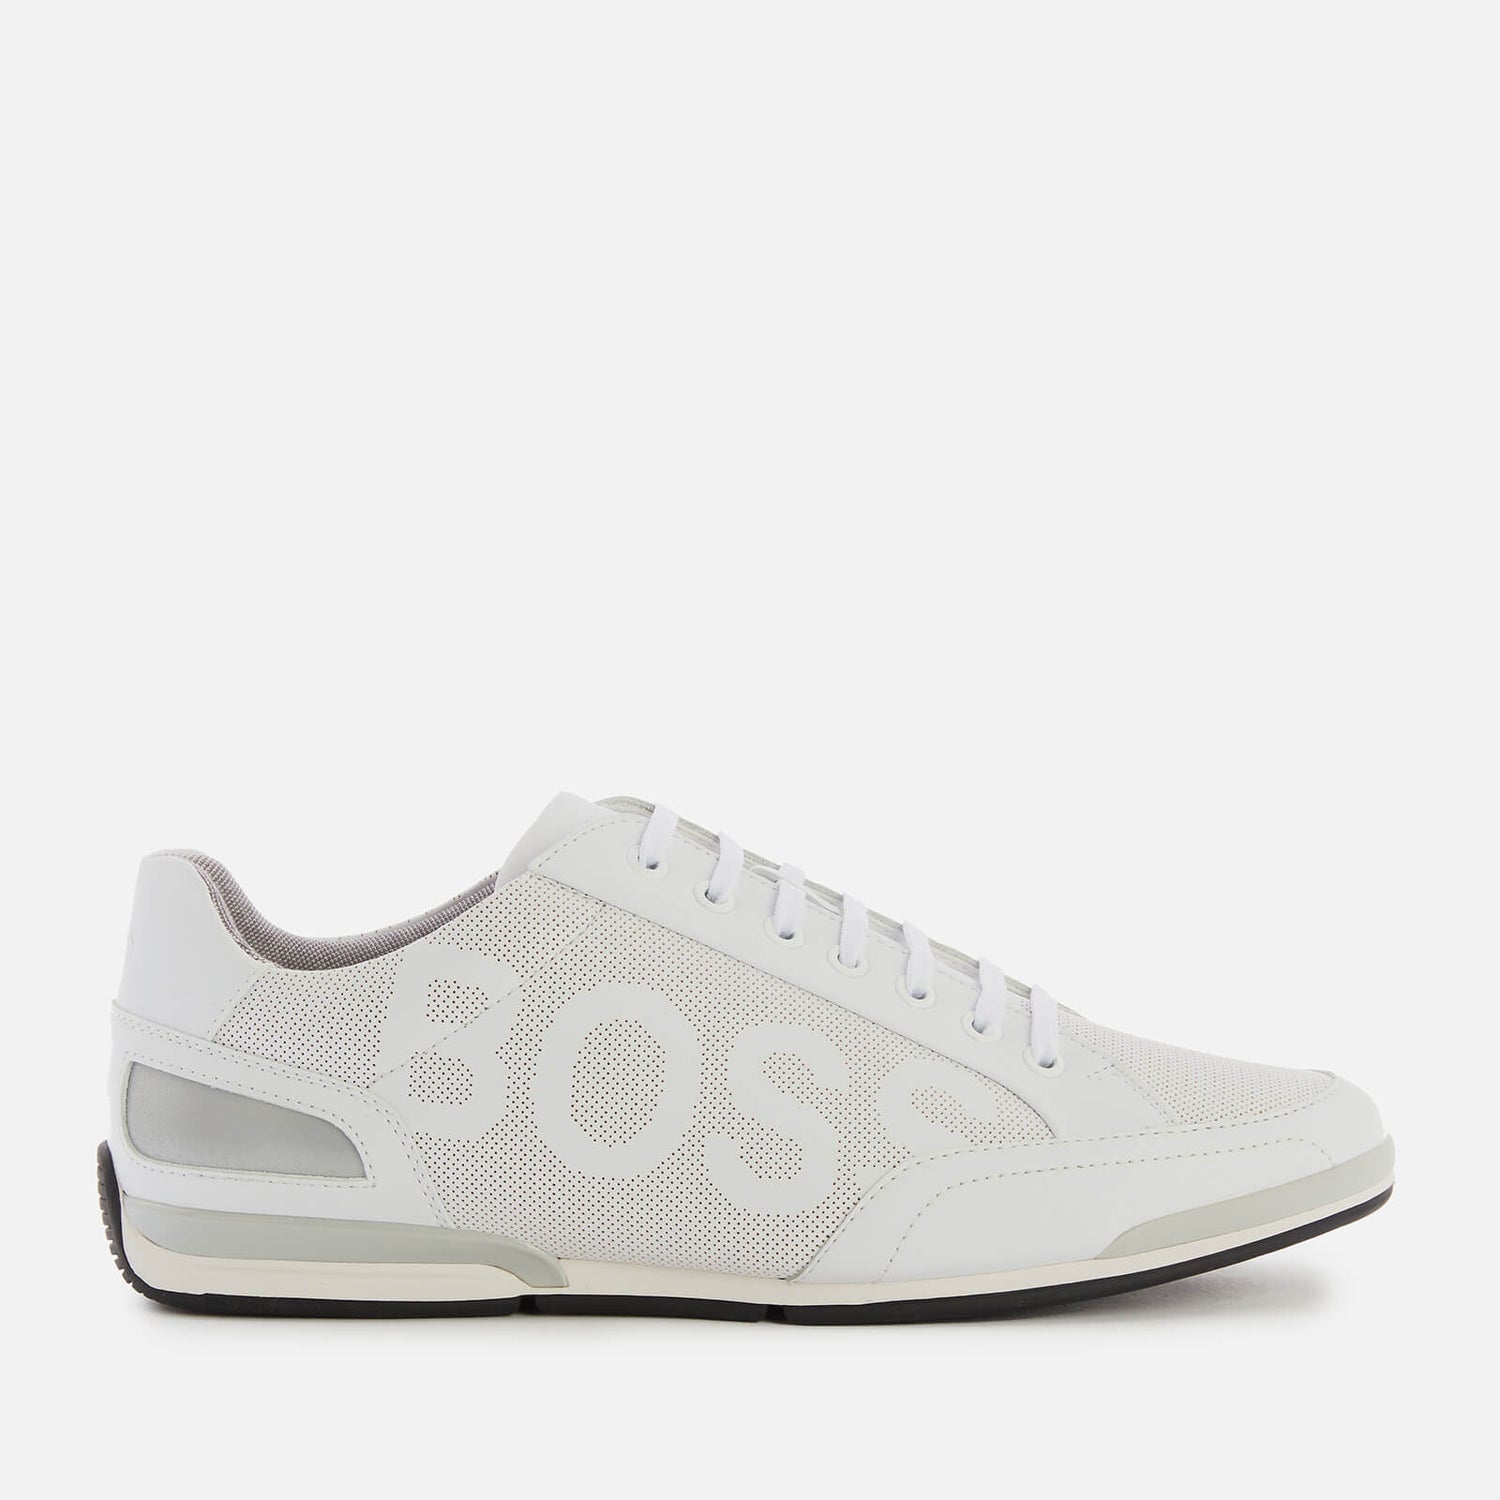 BOSS Business Men's Saturn Low Trainers - White